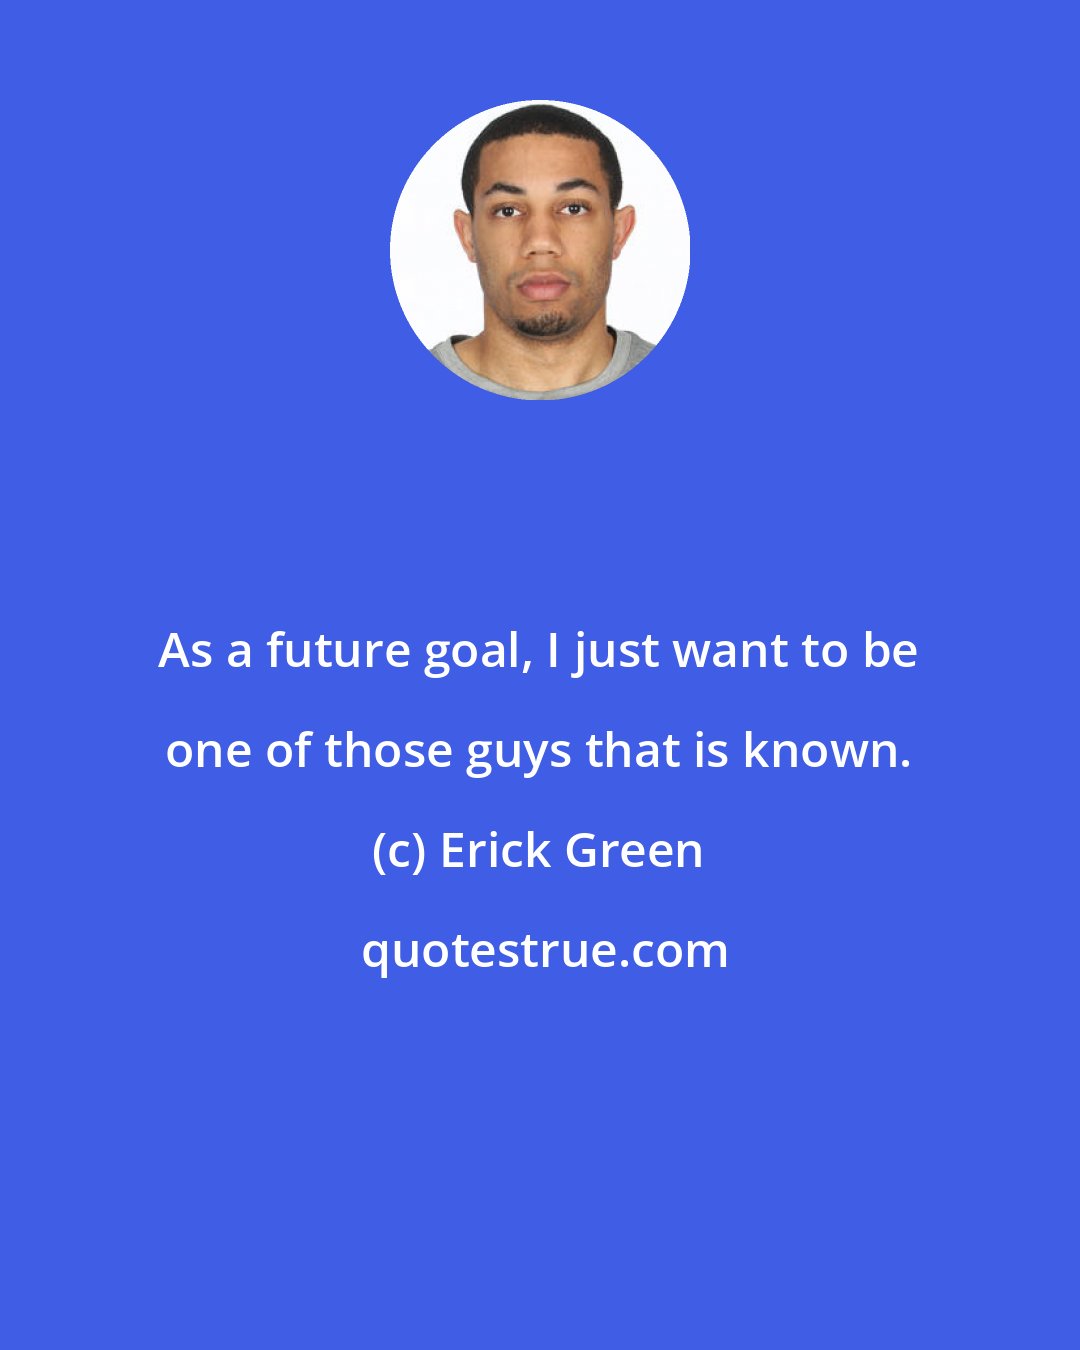 Erick Green: As a future goal, I just want to be one of those guys that is known.